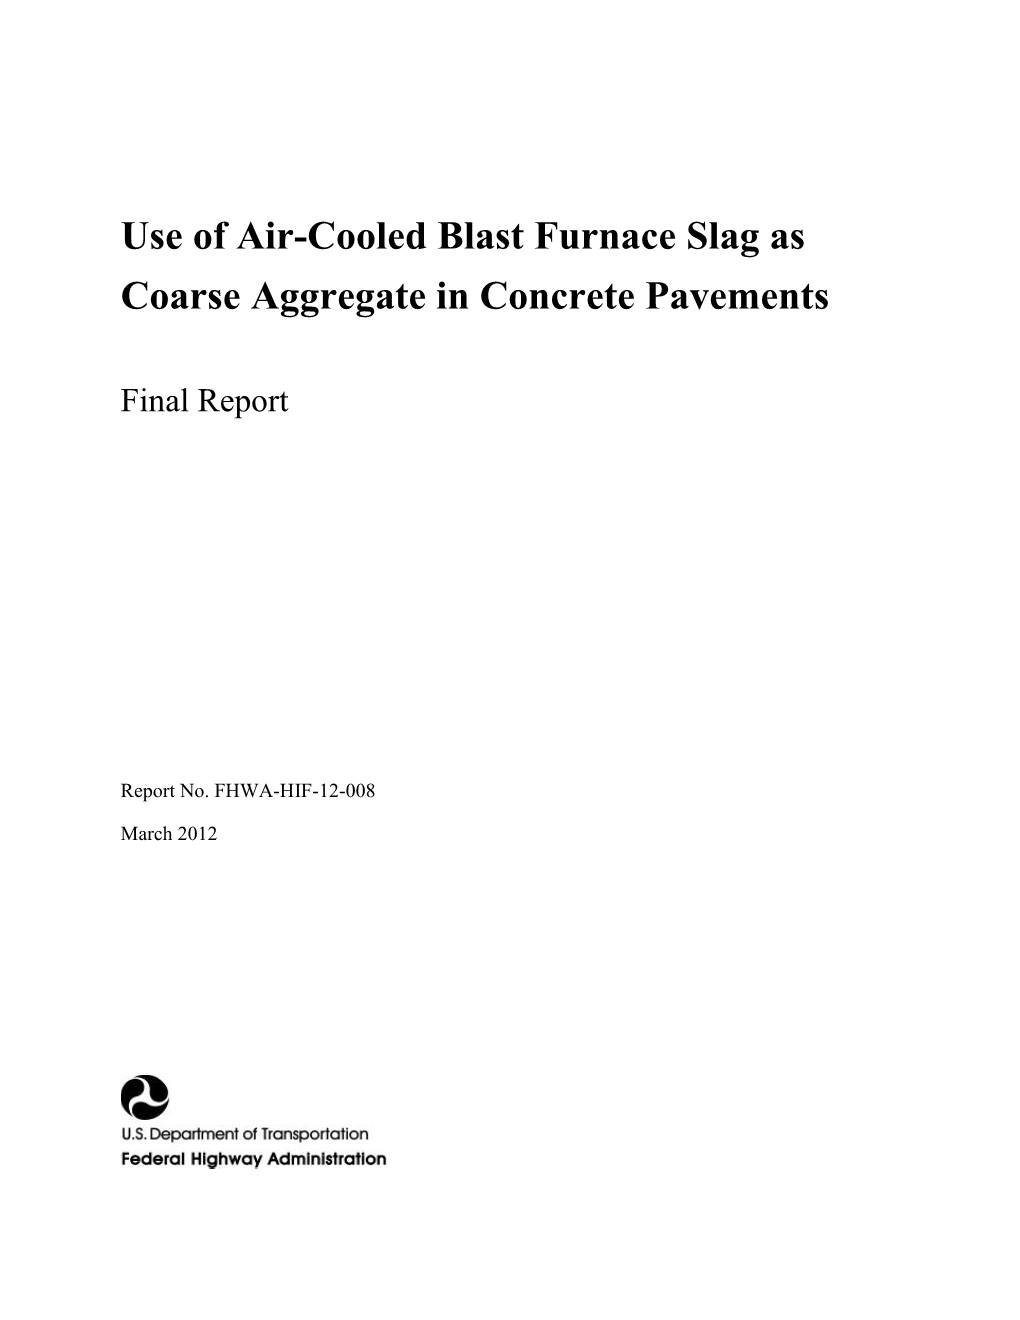 Use of Air-Cooled Blast Furnace Slag As Coarse Aggregate in Concrete Pavements